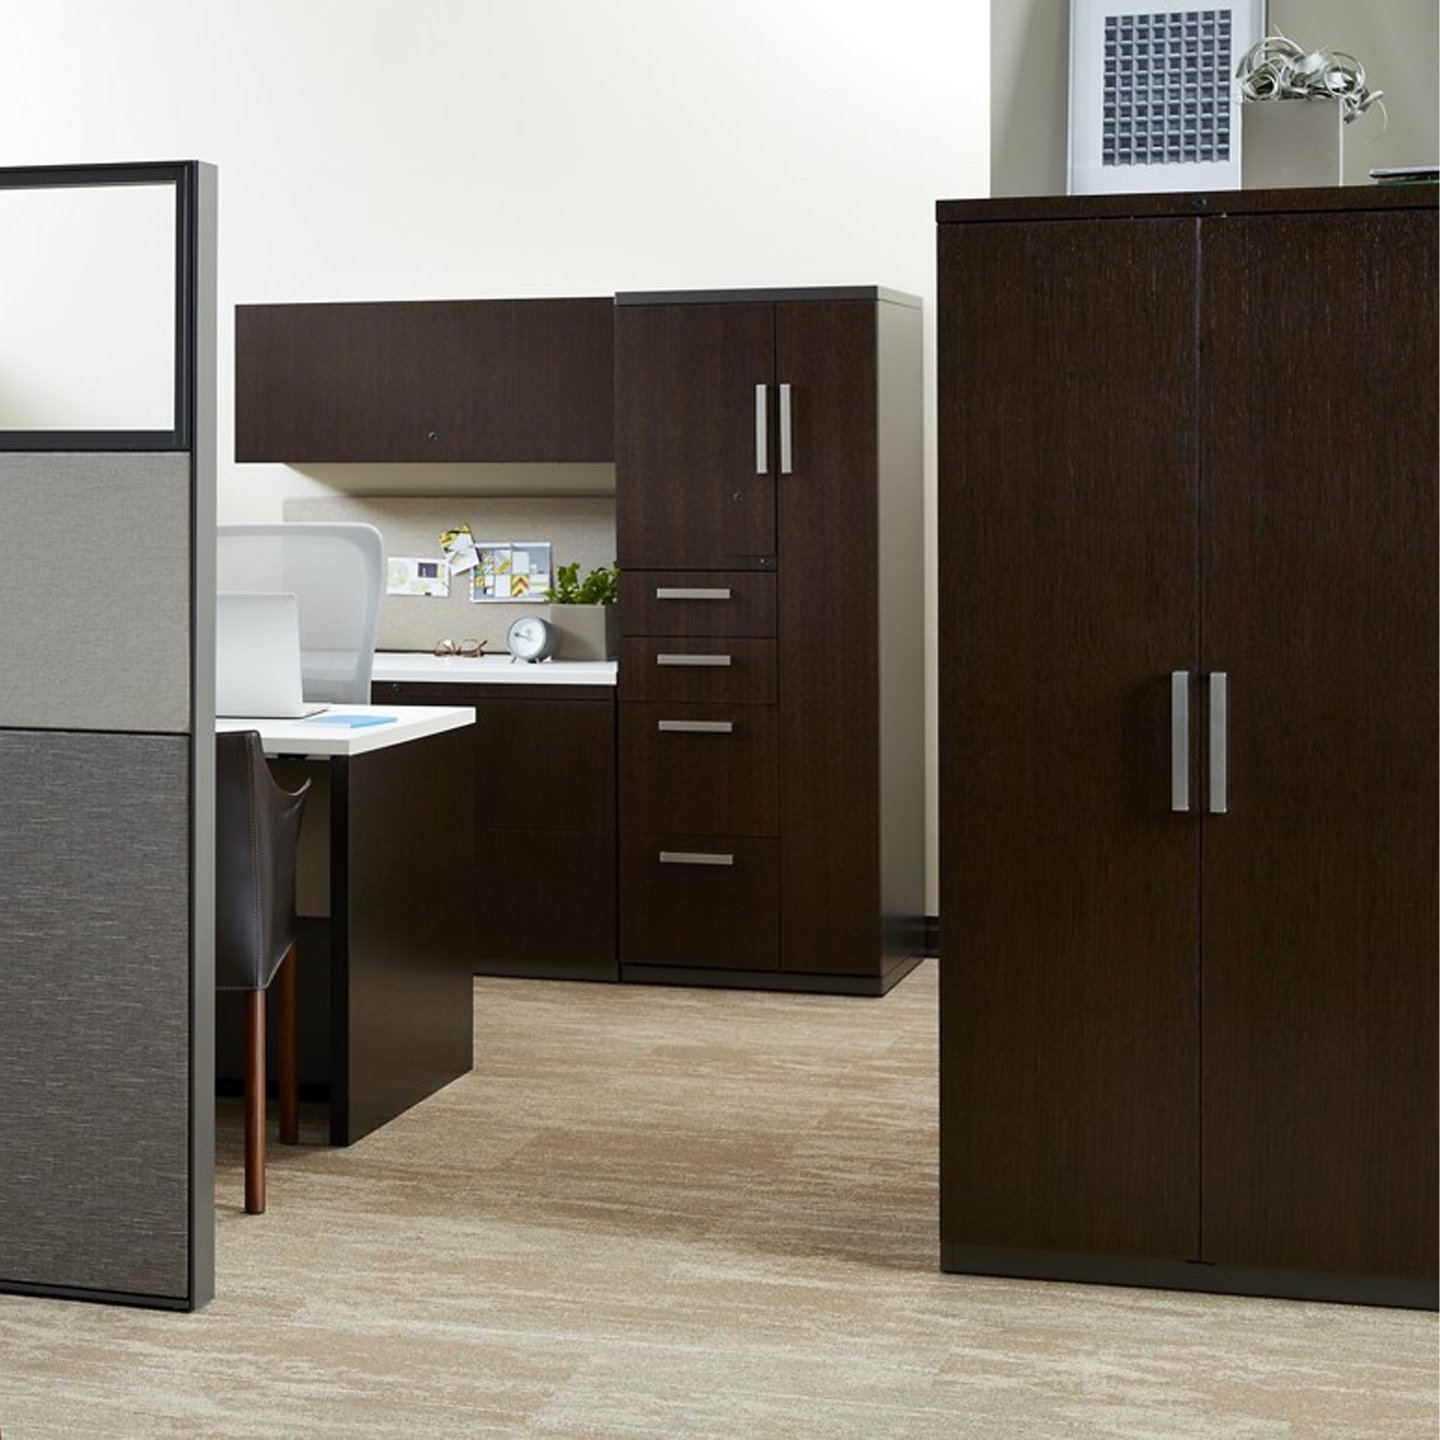 Compose storage unit in dark wood at workstation with classic door handles on cabinets and drawers.